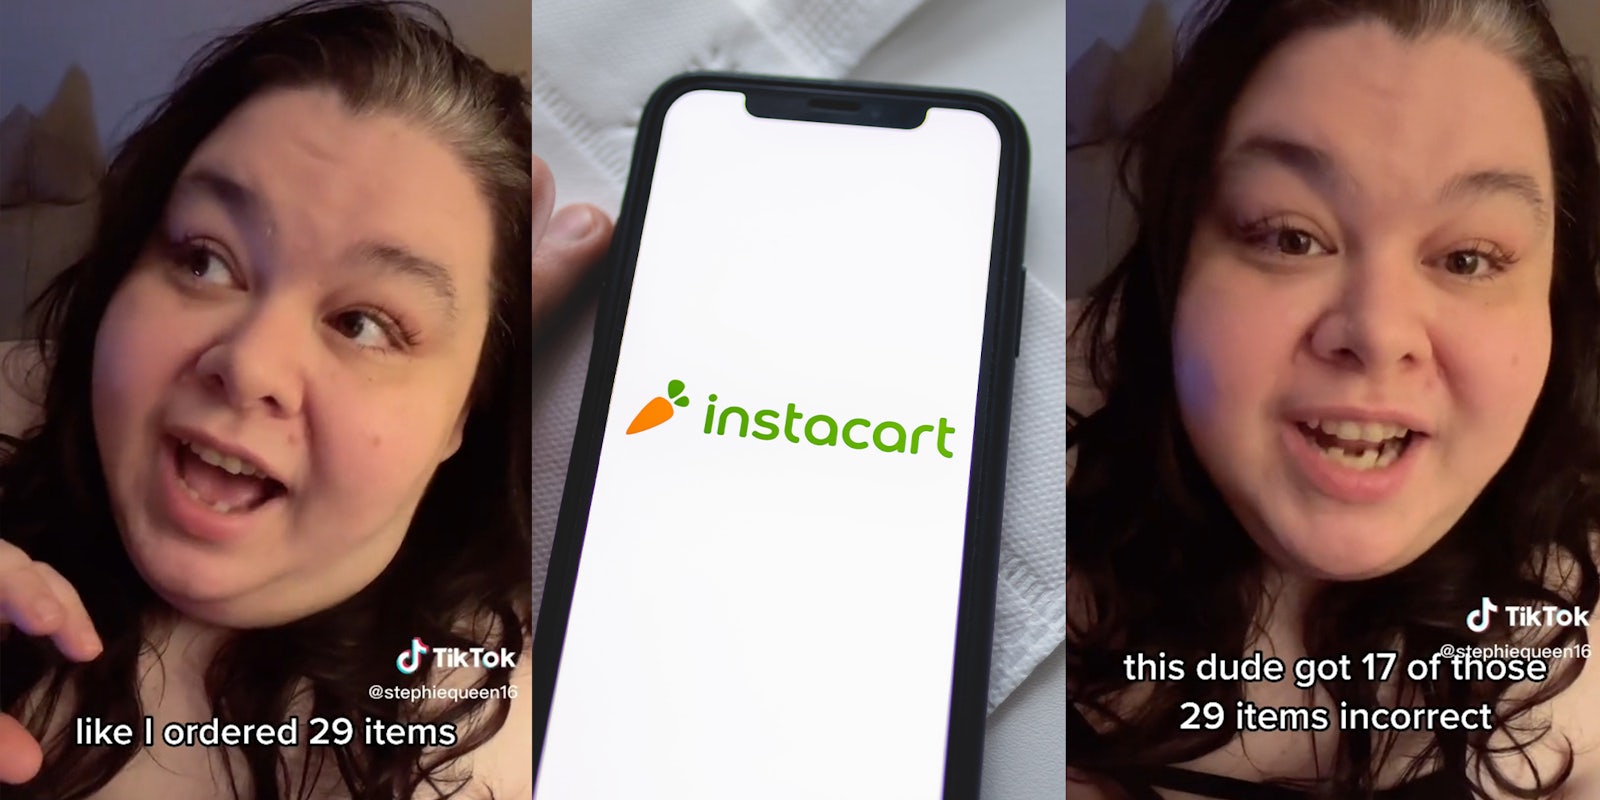 Instacart customer says shopper got 17 out of 29 items incorrect